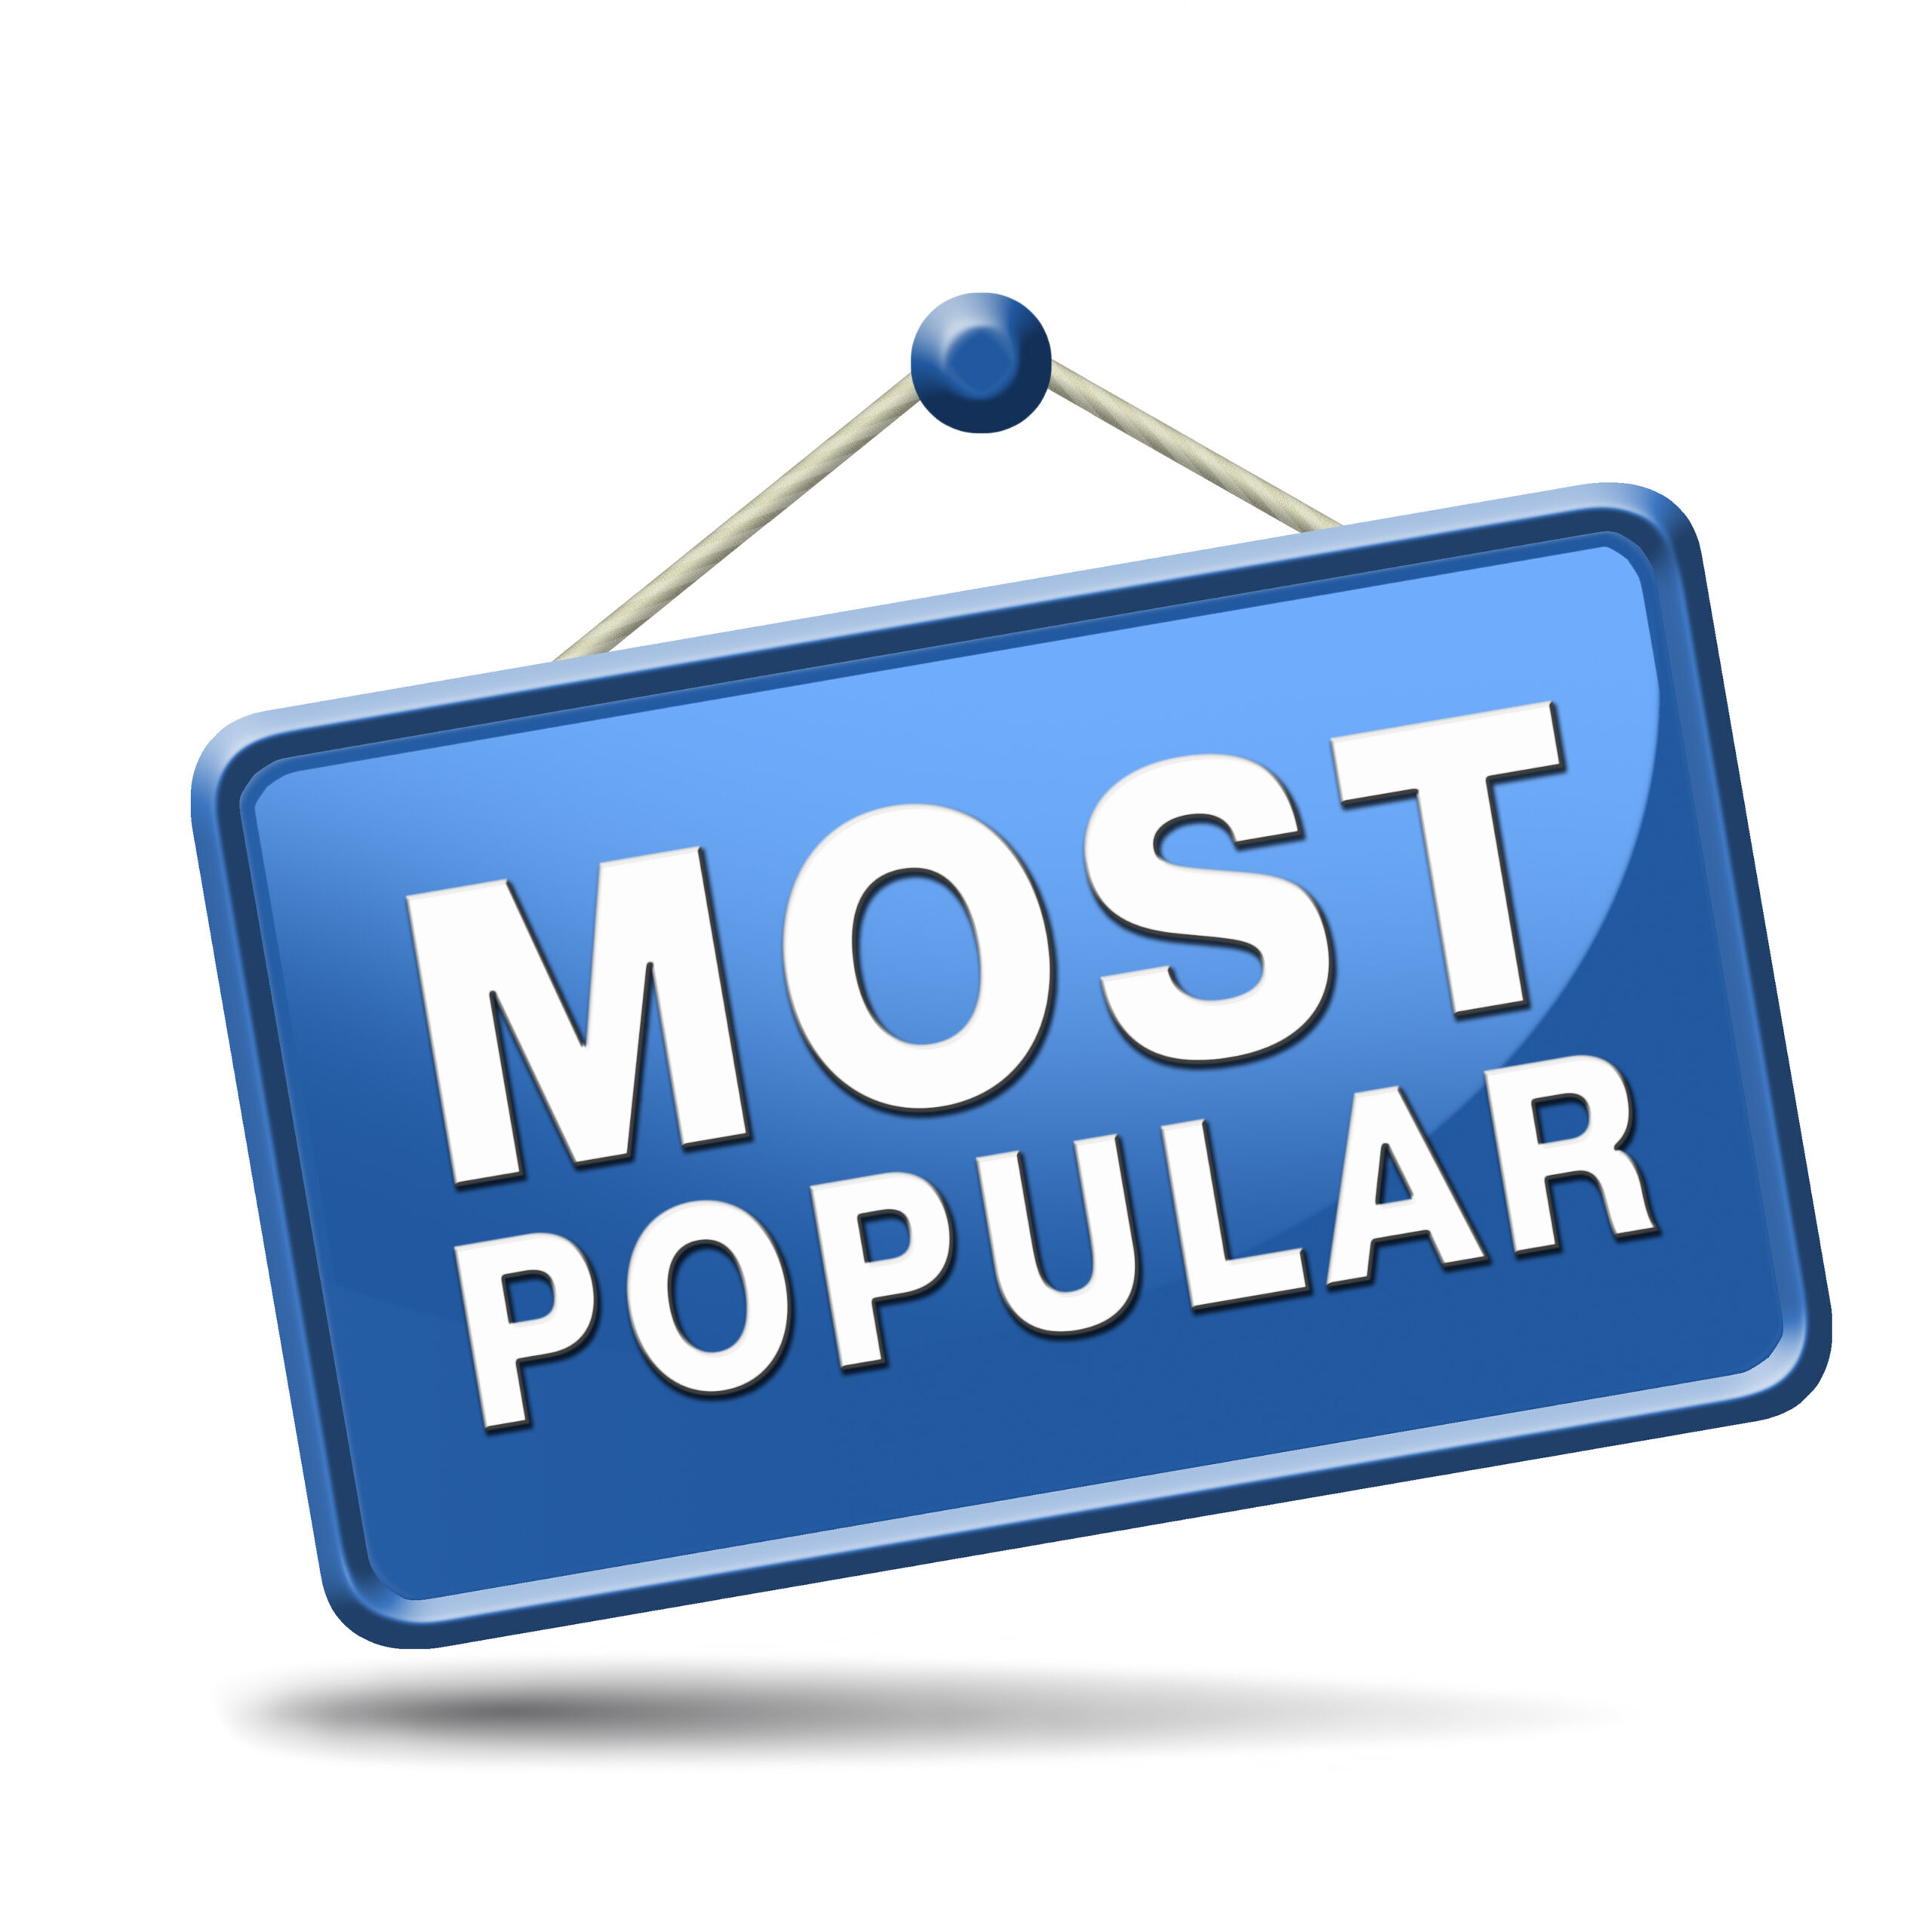 Most,Popular,Sign,Popularity,Label,Or,Icon,For,Bestseller,Or